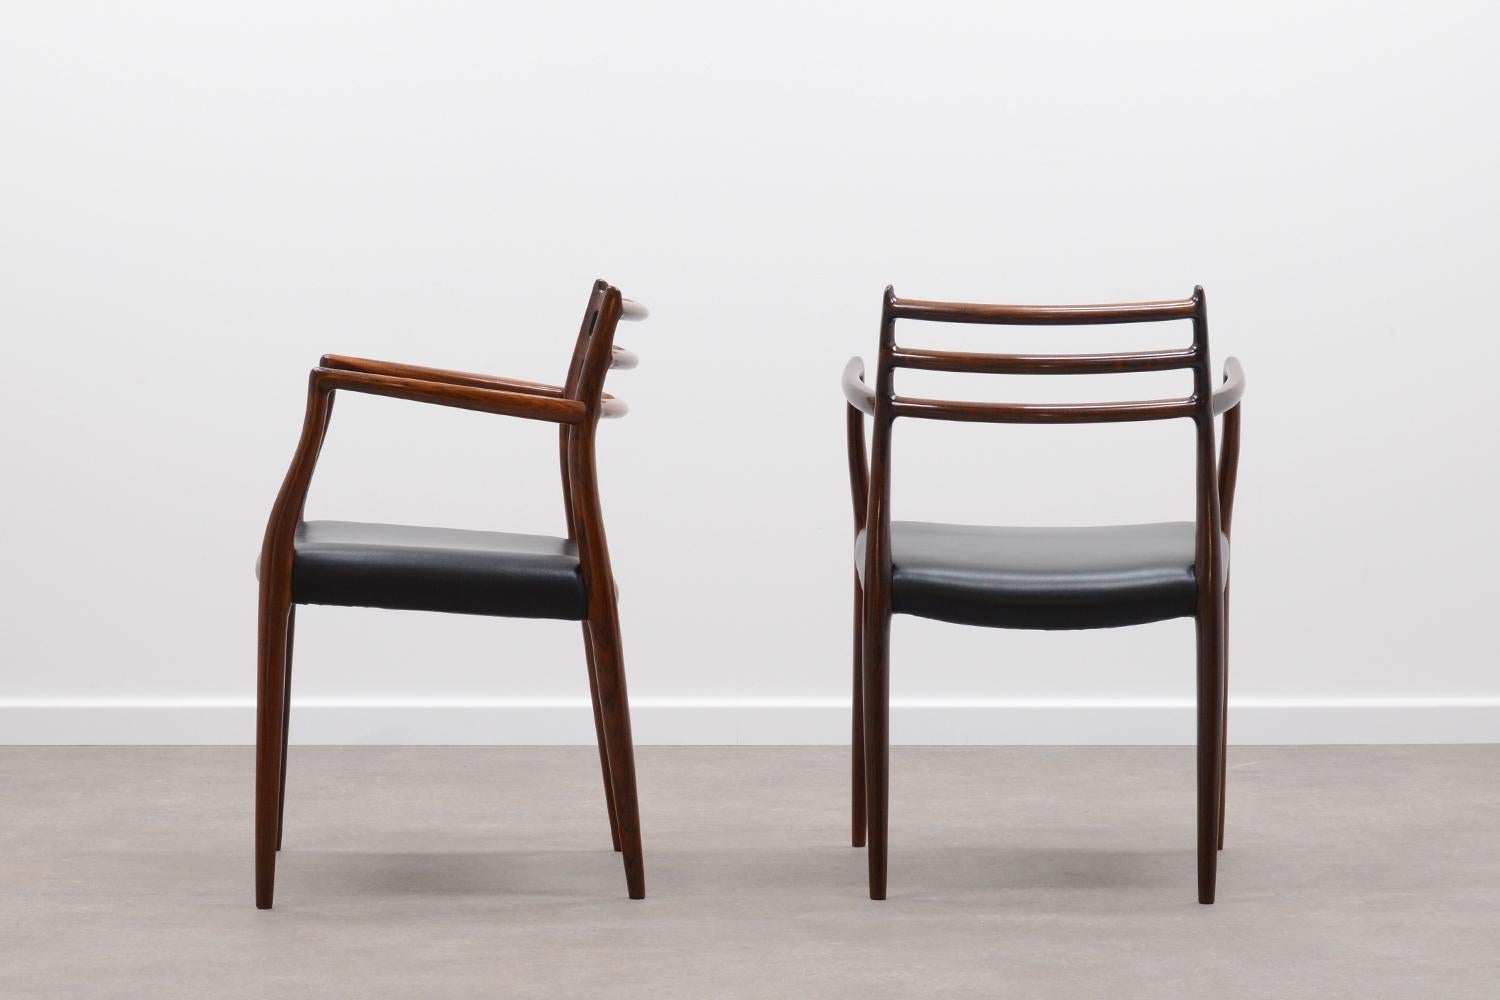 Set of 2 model 62 rosewood dining chairs by Niels Otto Møller for JL Møllers møbelfabrik 60s. Solid rosewood frame and black leather seat. Beautiful details and in very good vintage condition.